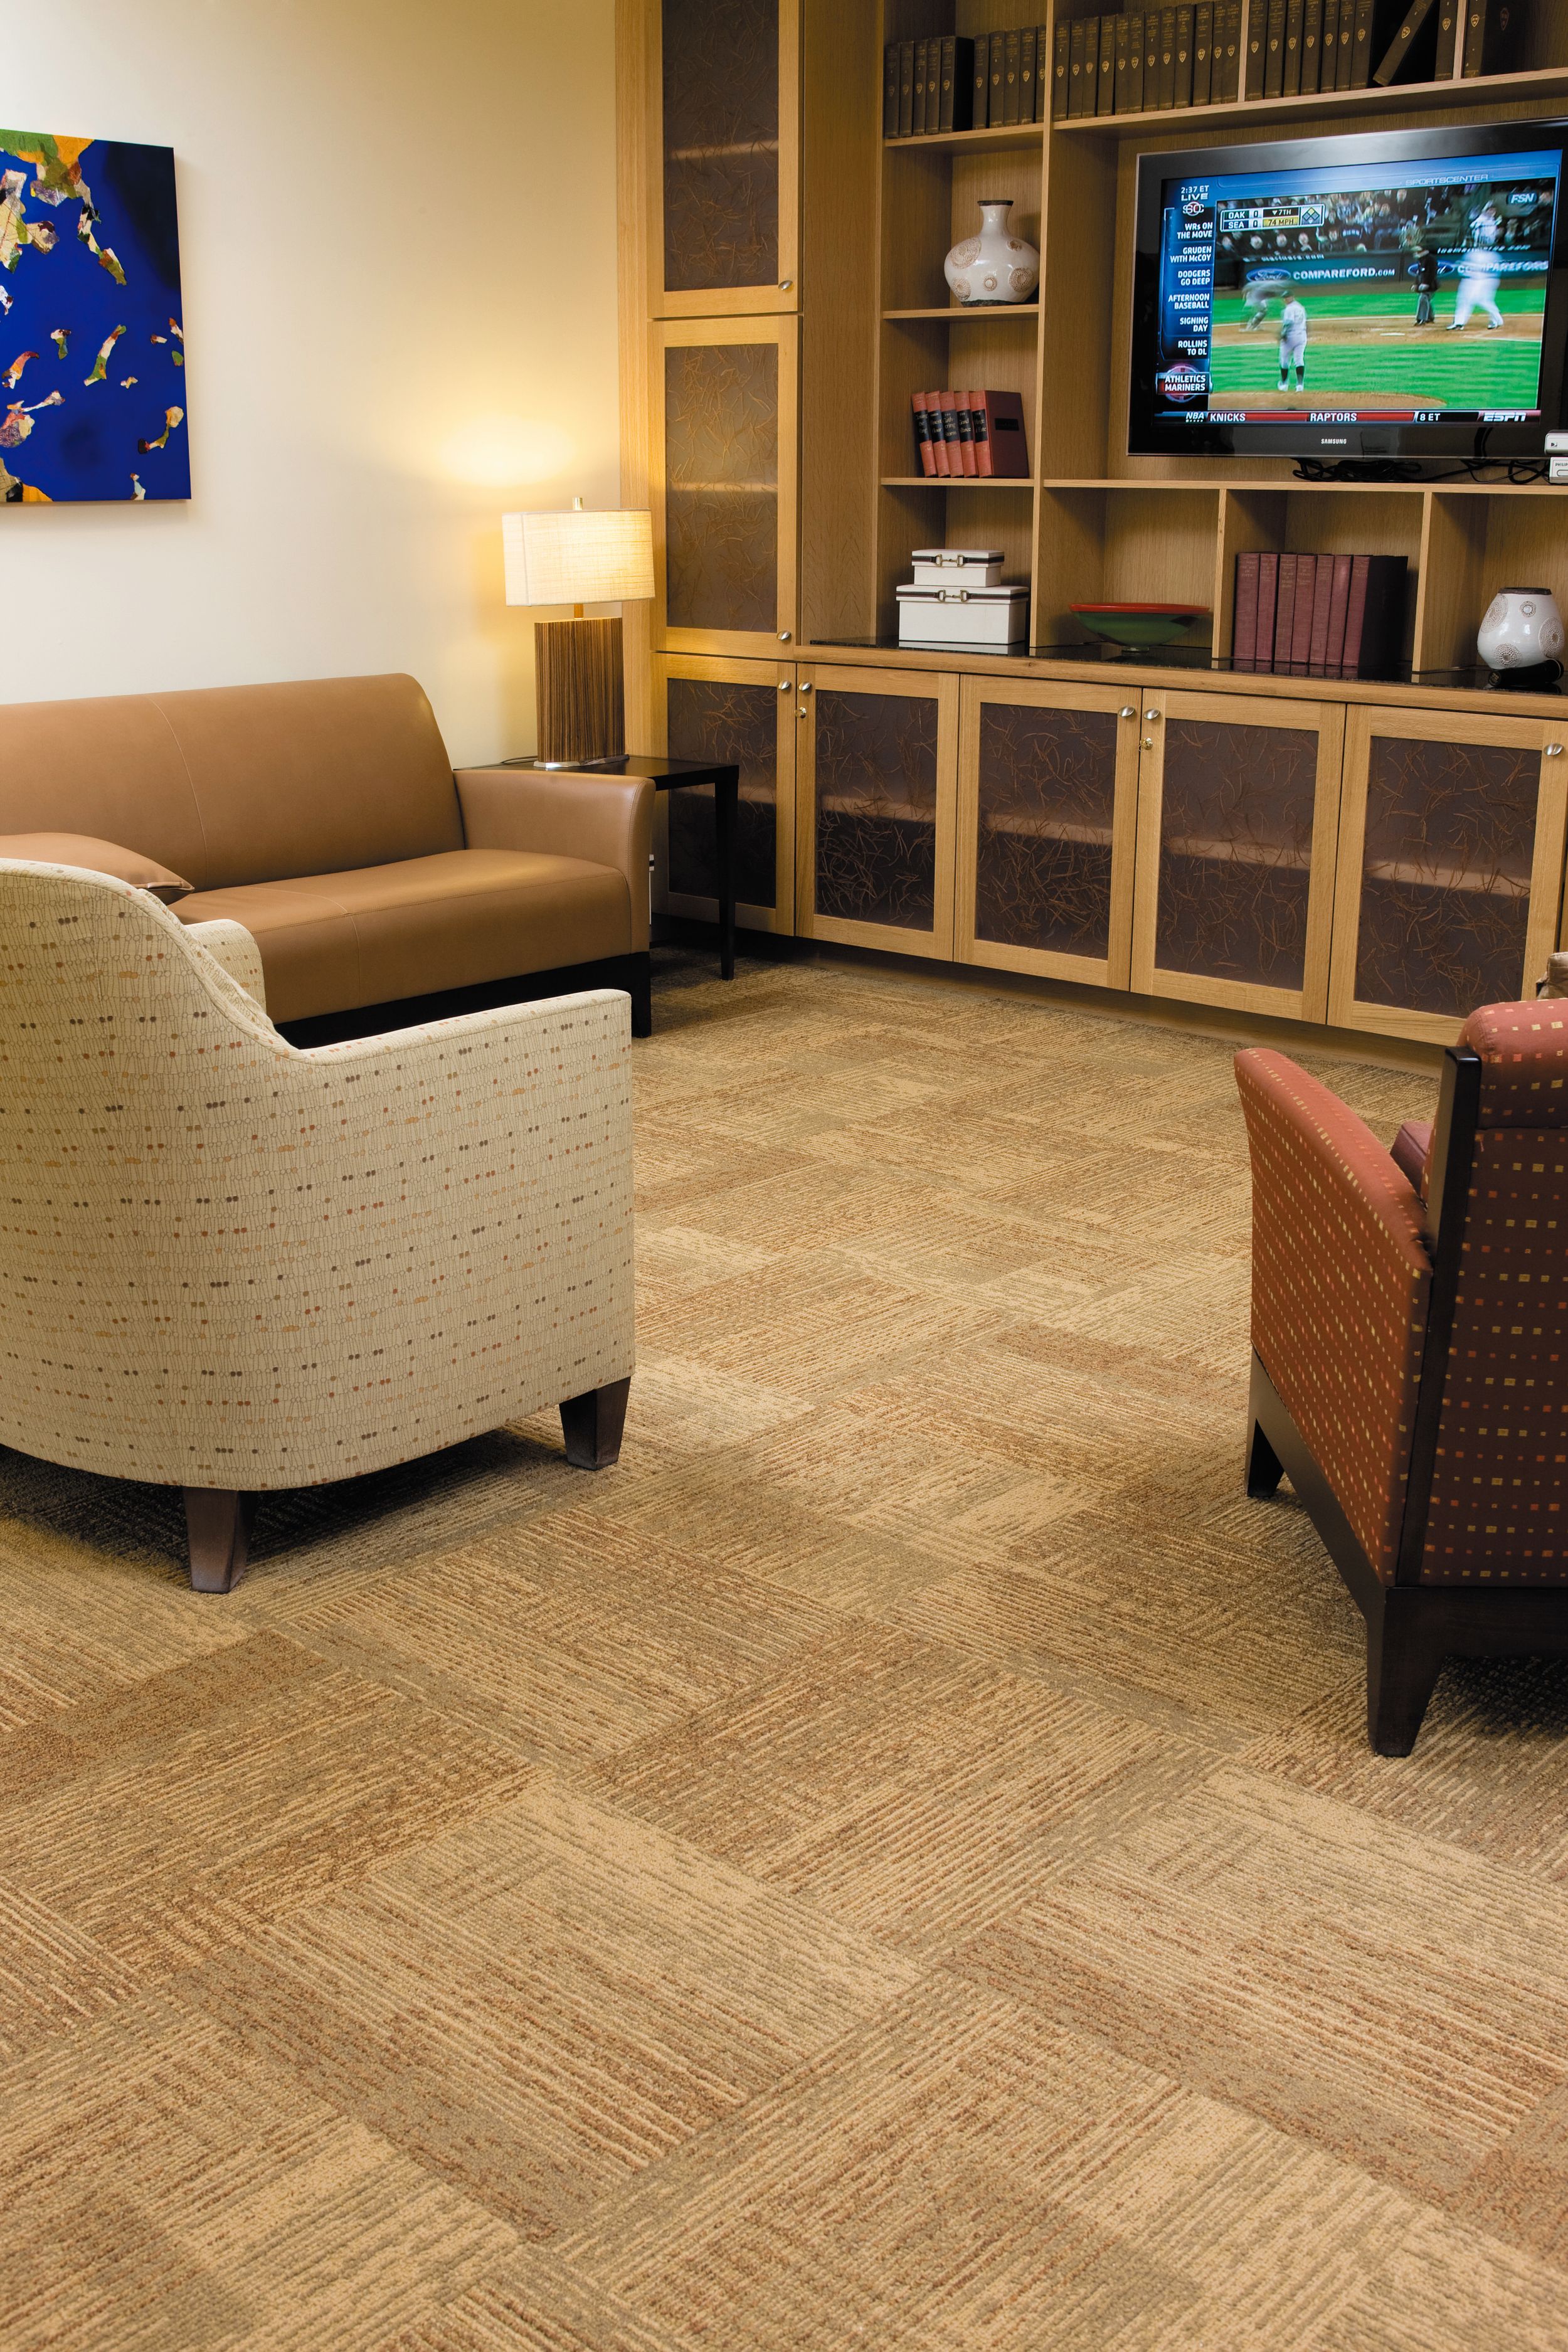 Interface Plain Weave carpet tile in living room area with couch and two chairs numéro d’image 12